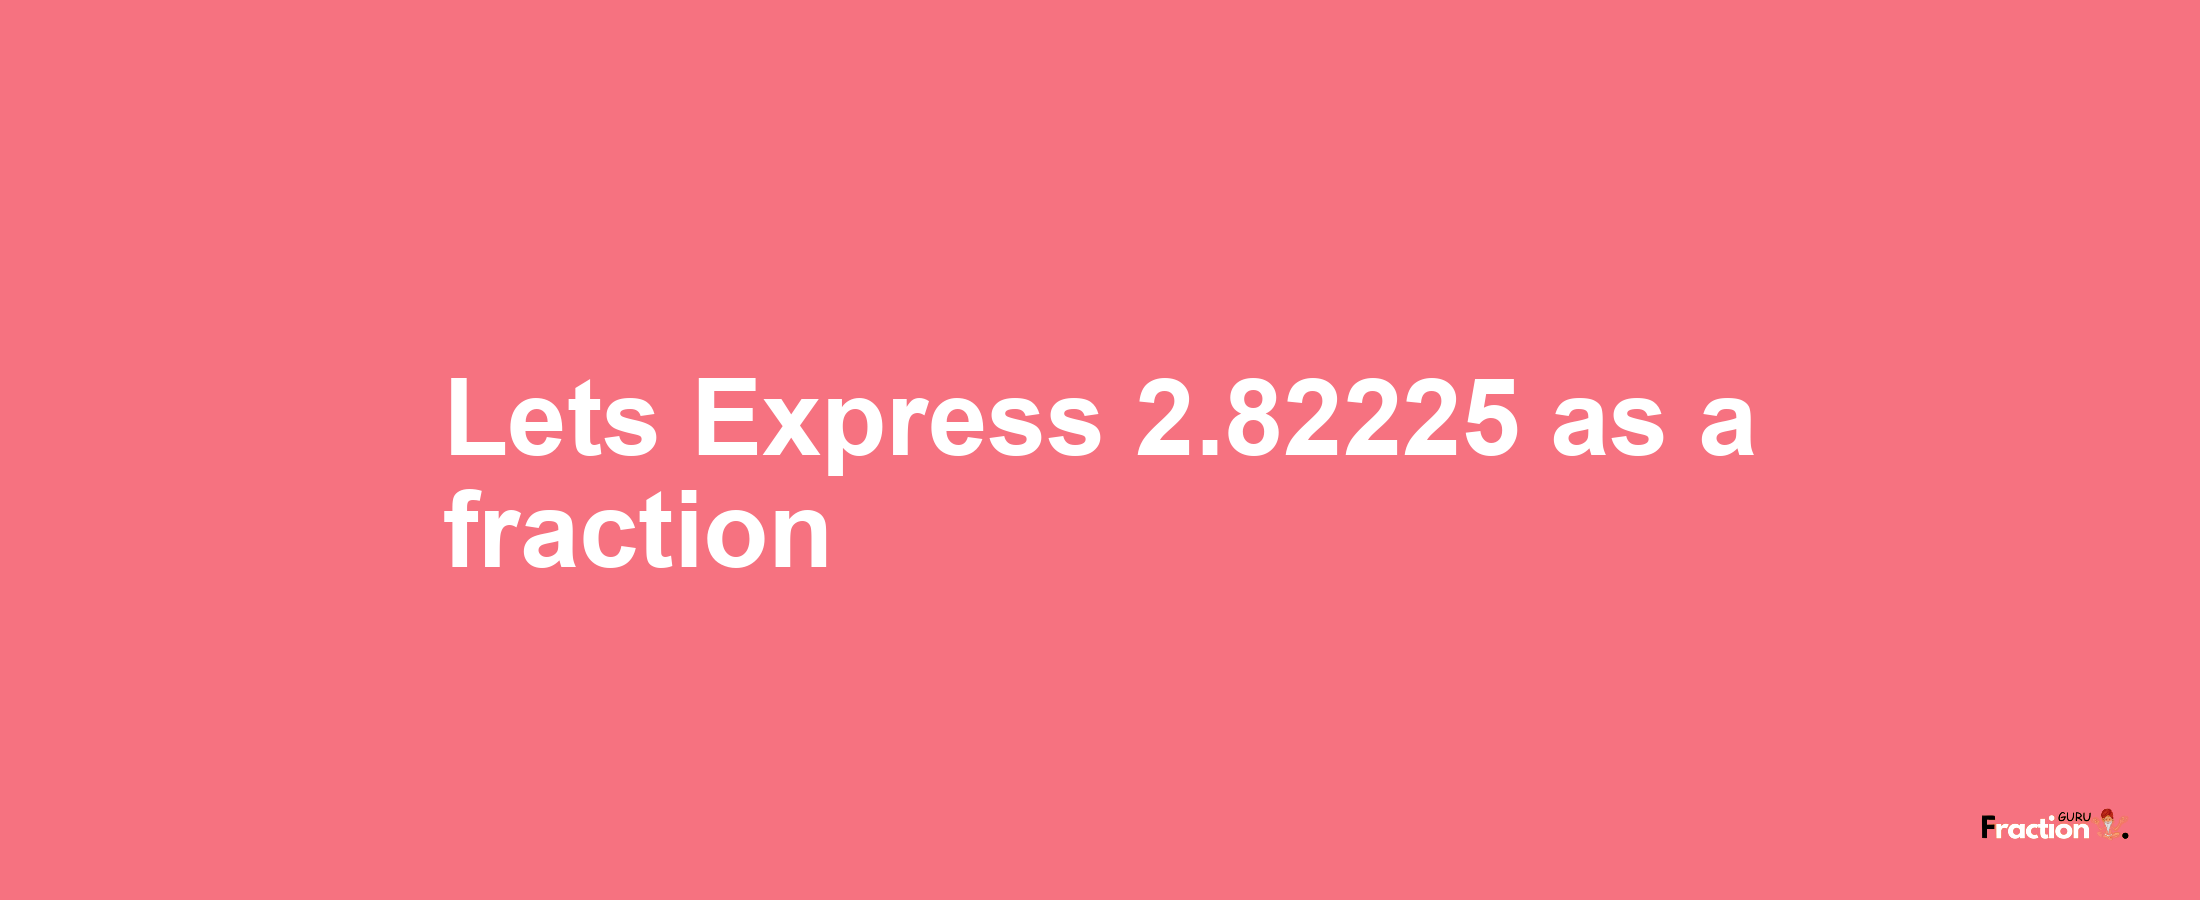 Lets Express 2.82225 as afraction